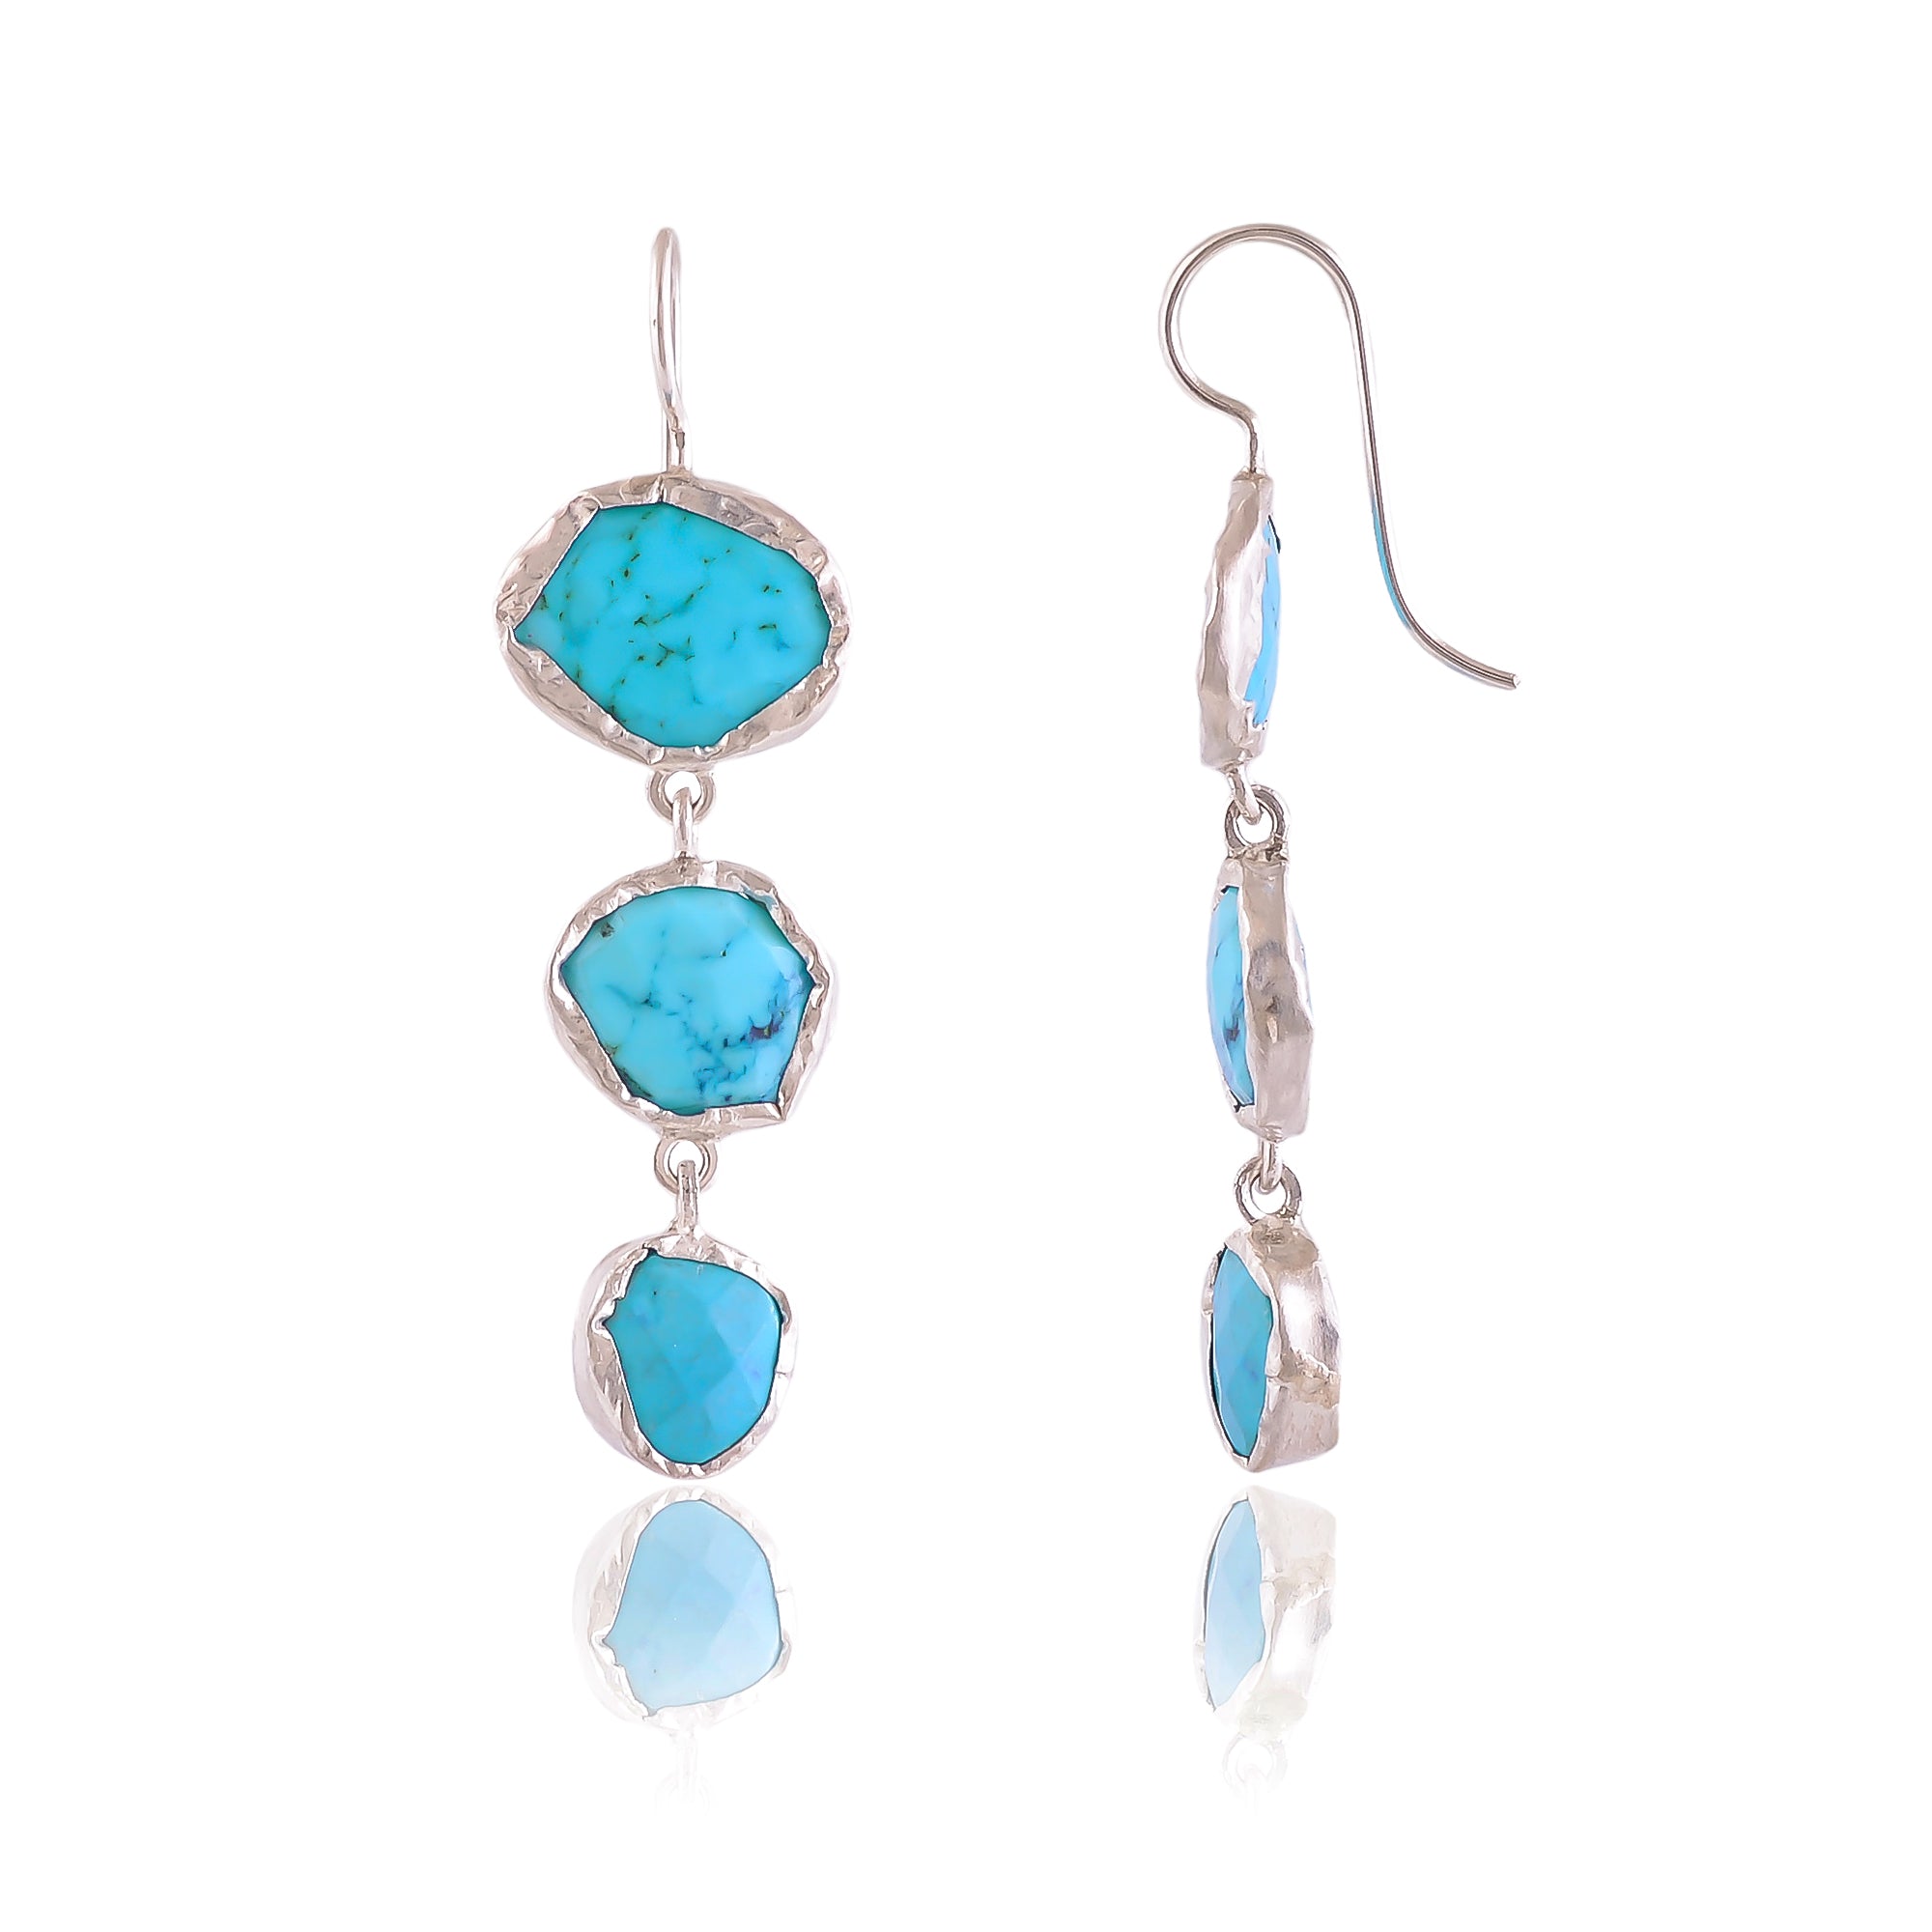 Buy Hand Crafted Silver Turquoise Crush Wrap Earring